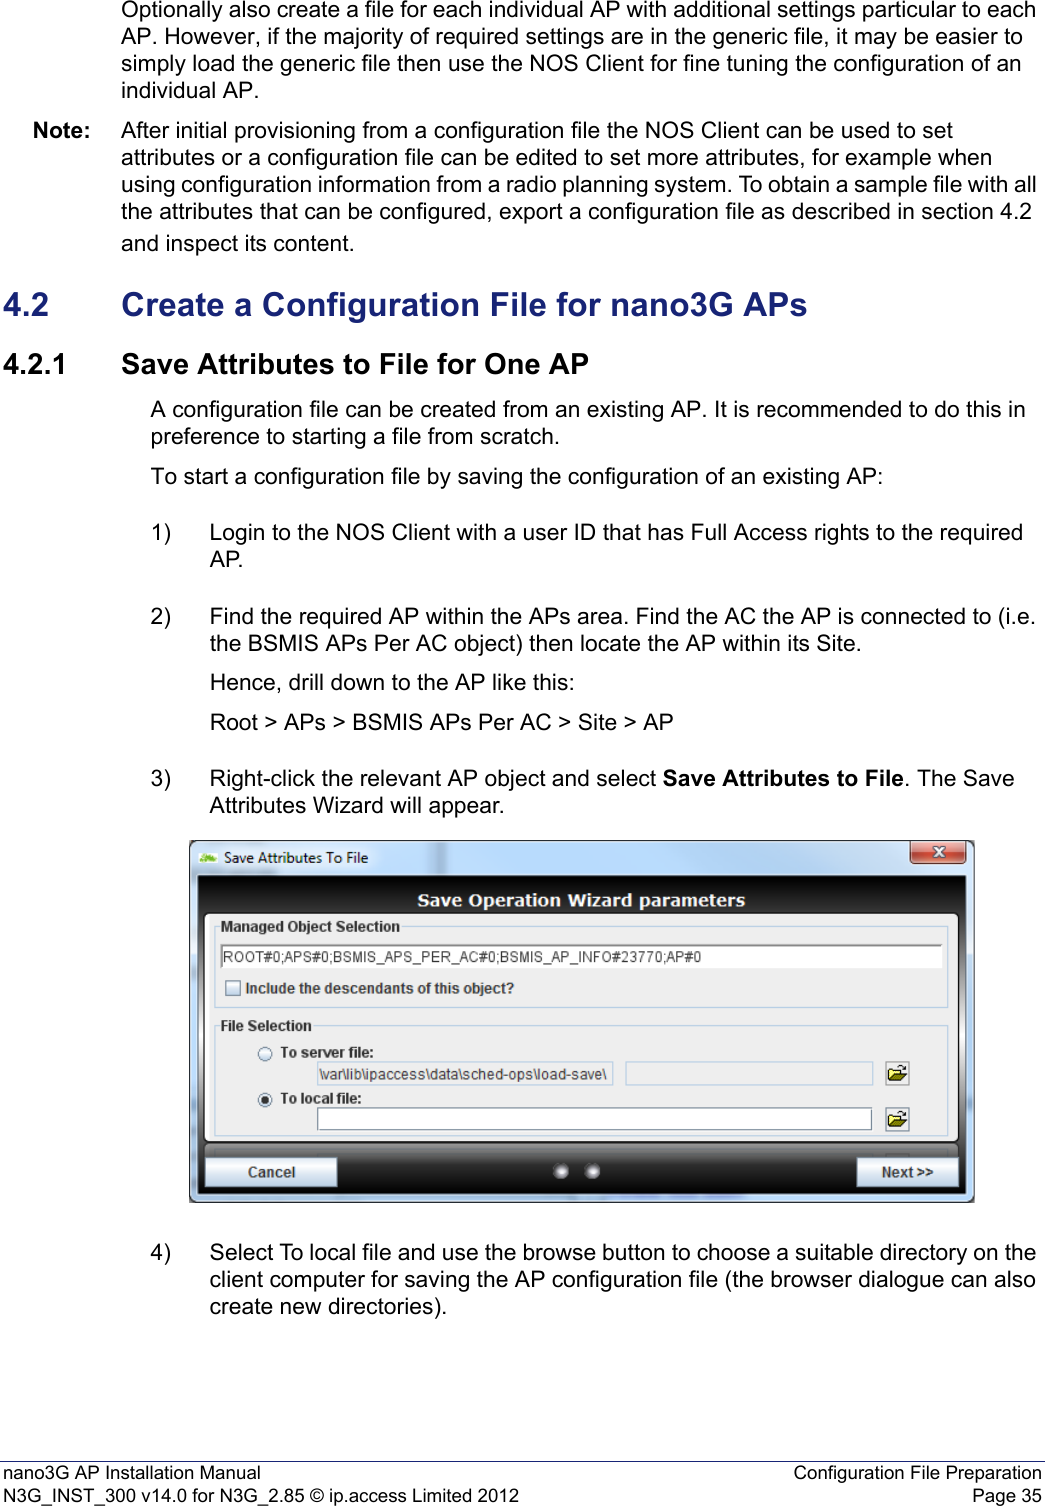 nano3G AP Installation Manual Configuration File PreparationN3G_INST_300 v14.0 for N3G_2.85 © ip.access Limited 2012 Page 35Optionally also create a file for each individual AP with additional settings particular to each AP. However, if the majority of required settings are in the generic file, it may be easier to simply load the generic file then use the NOS Client for fine tuning the configuration of an individual AP.Note: After initial provisioning from a configuration file the NOS Client can be used to set attributes or a configuration file can be edited to set more attributes, for example when using configuration information from a radio planning system. To obtain a sample file with all the attributes that can be configured, export a configuration file as described in section 4.2 and inspect its content.4.2 Create a Configuration File for nano3G APs4.2.1 Save Attributes to File for One APA configuration file can be created from an existing AP. It is recommended to do this in preference to starting a file from scratch.To start a configuration file by saving the configuration of an existing AP:1) Login to the NOS Client with a user ID that has Full Access rights to the required AP.2) Find the required AP within the APs area. Find the AC the AP is connected to (i.e. the BSMIS APs Per AC object) then locate the AP within its Site. Hence, drill down to the AP like this:Root &gt; APs &gt; BSMIS APs Per AC &gt; Site &gt; AP3) Right-click the relevant AP object and select Save Attributes to File. The Save Attributes Wizard will appear.4) Select To local file and use the browse button to choose a suitable directory on the client computer for saving the AP configuration file (the browser dialogue can also create new directories).